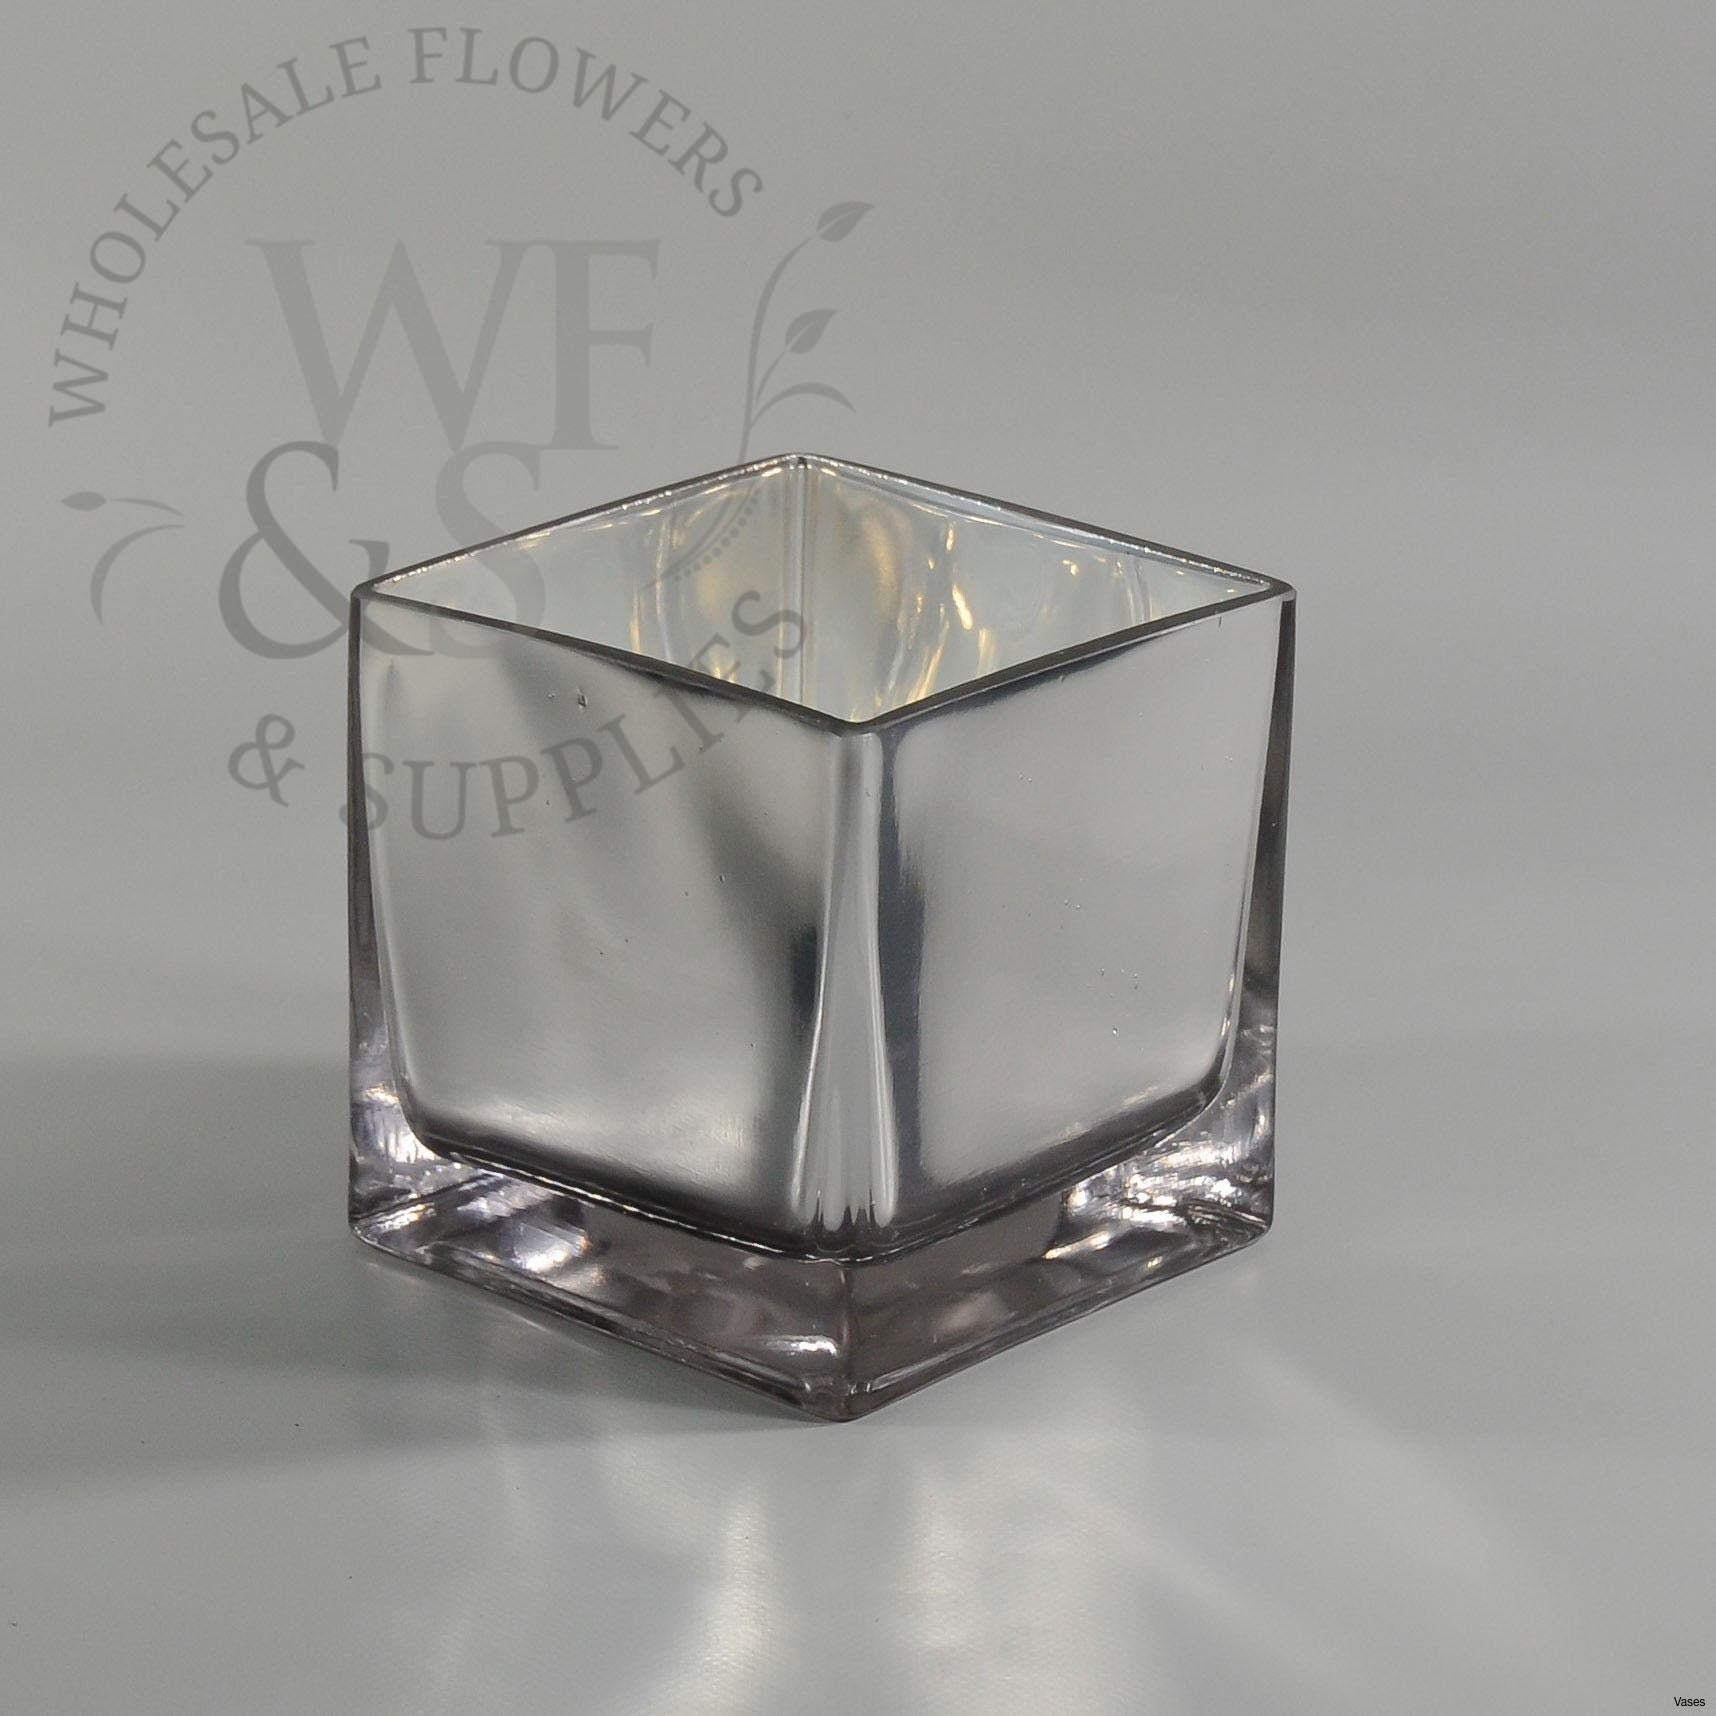 23 attractive Black Crystal Vase 2024 free download black crystal vase of 20 beautiful square black vases bogekompresorturkiye com in square mirrors lovely mirrored square vase 3h vases mirror table decorationi 0d weddings